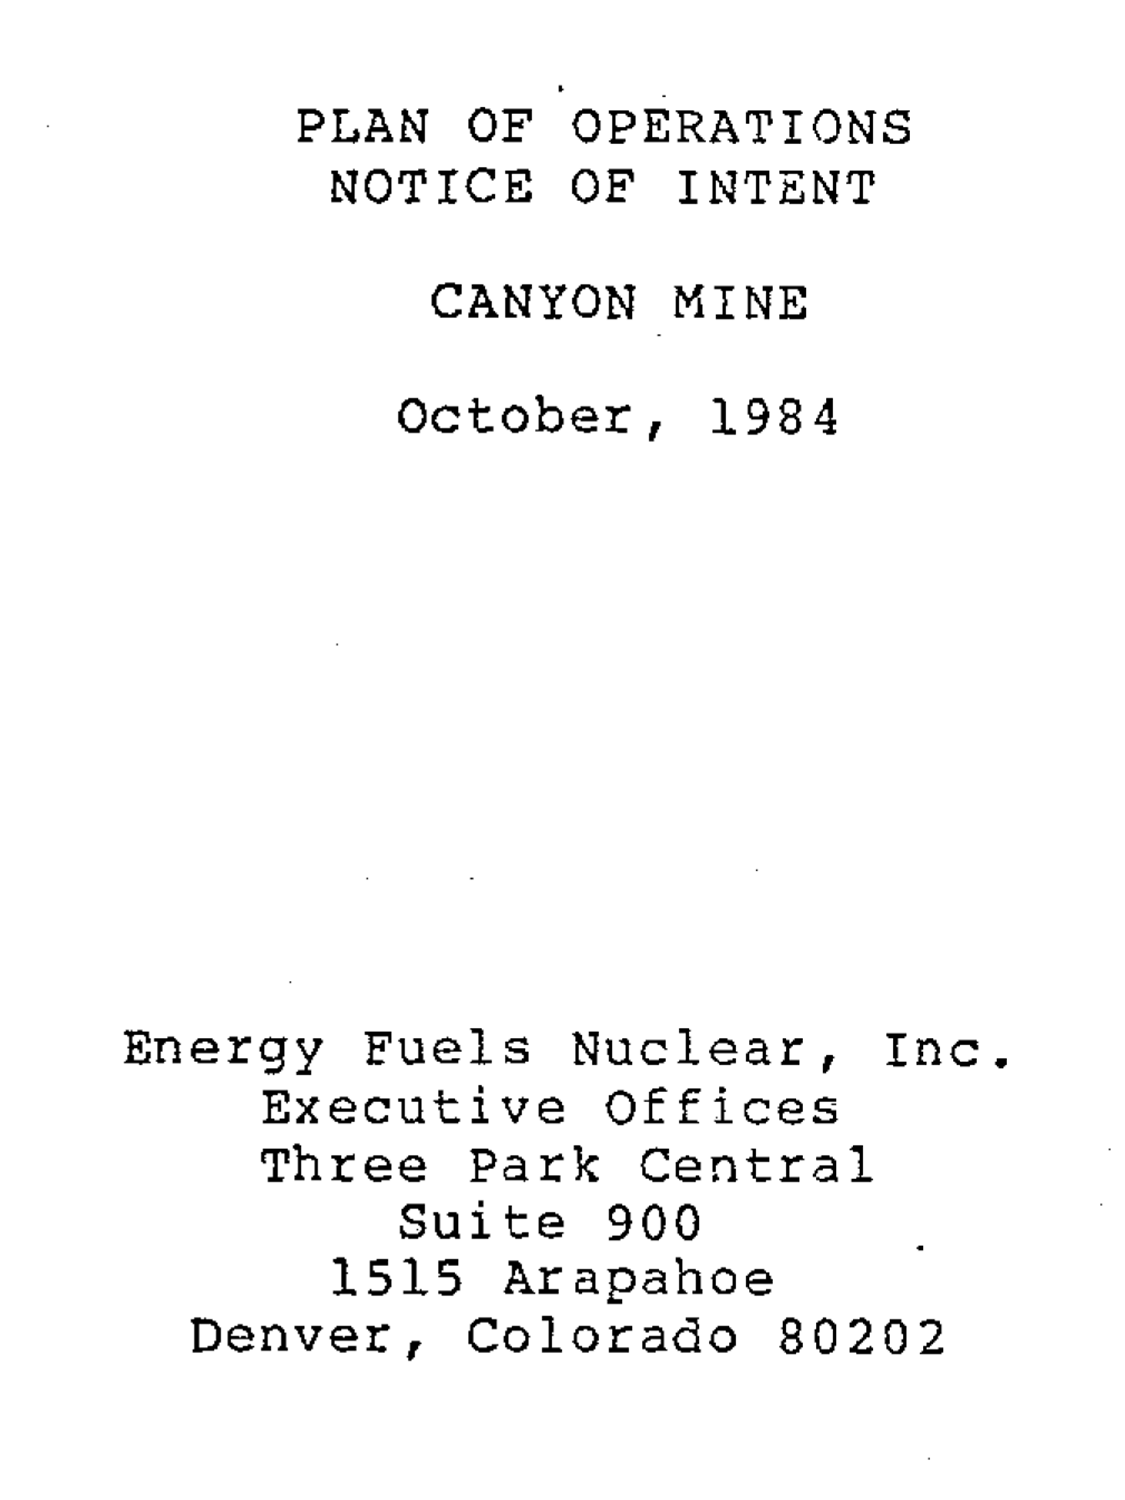 Plan of operations for the Canyon Mine Project